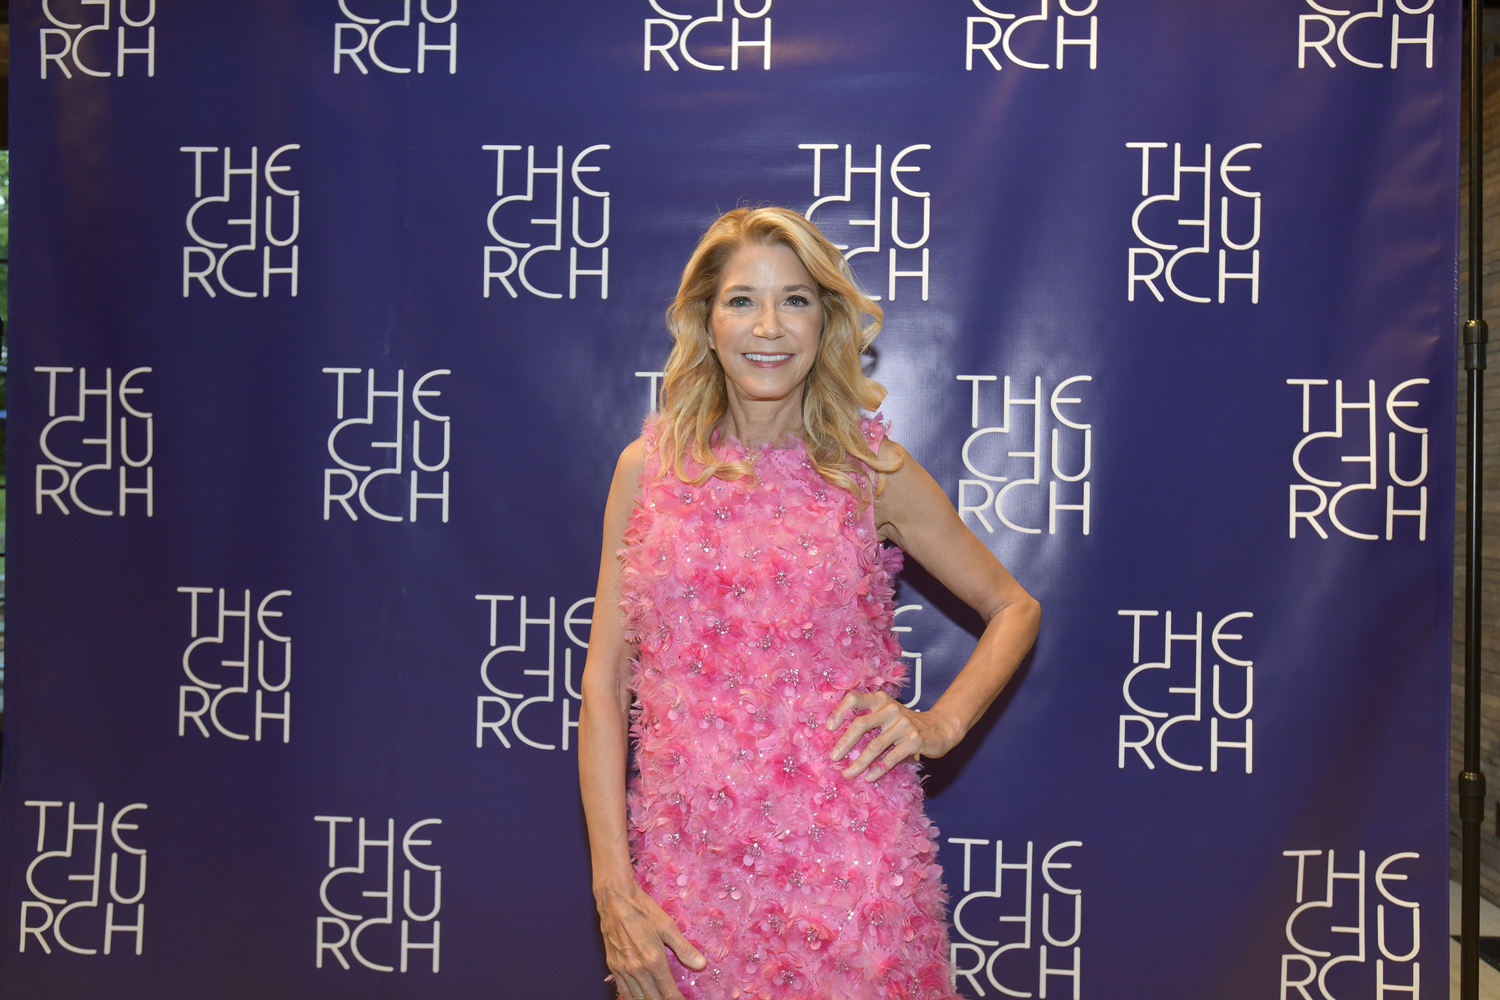 Candace Bushnell at The Church on Saturday evening for her one-woman show, “Is There Still Sex in the City?”    DANA SHAW